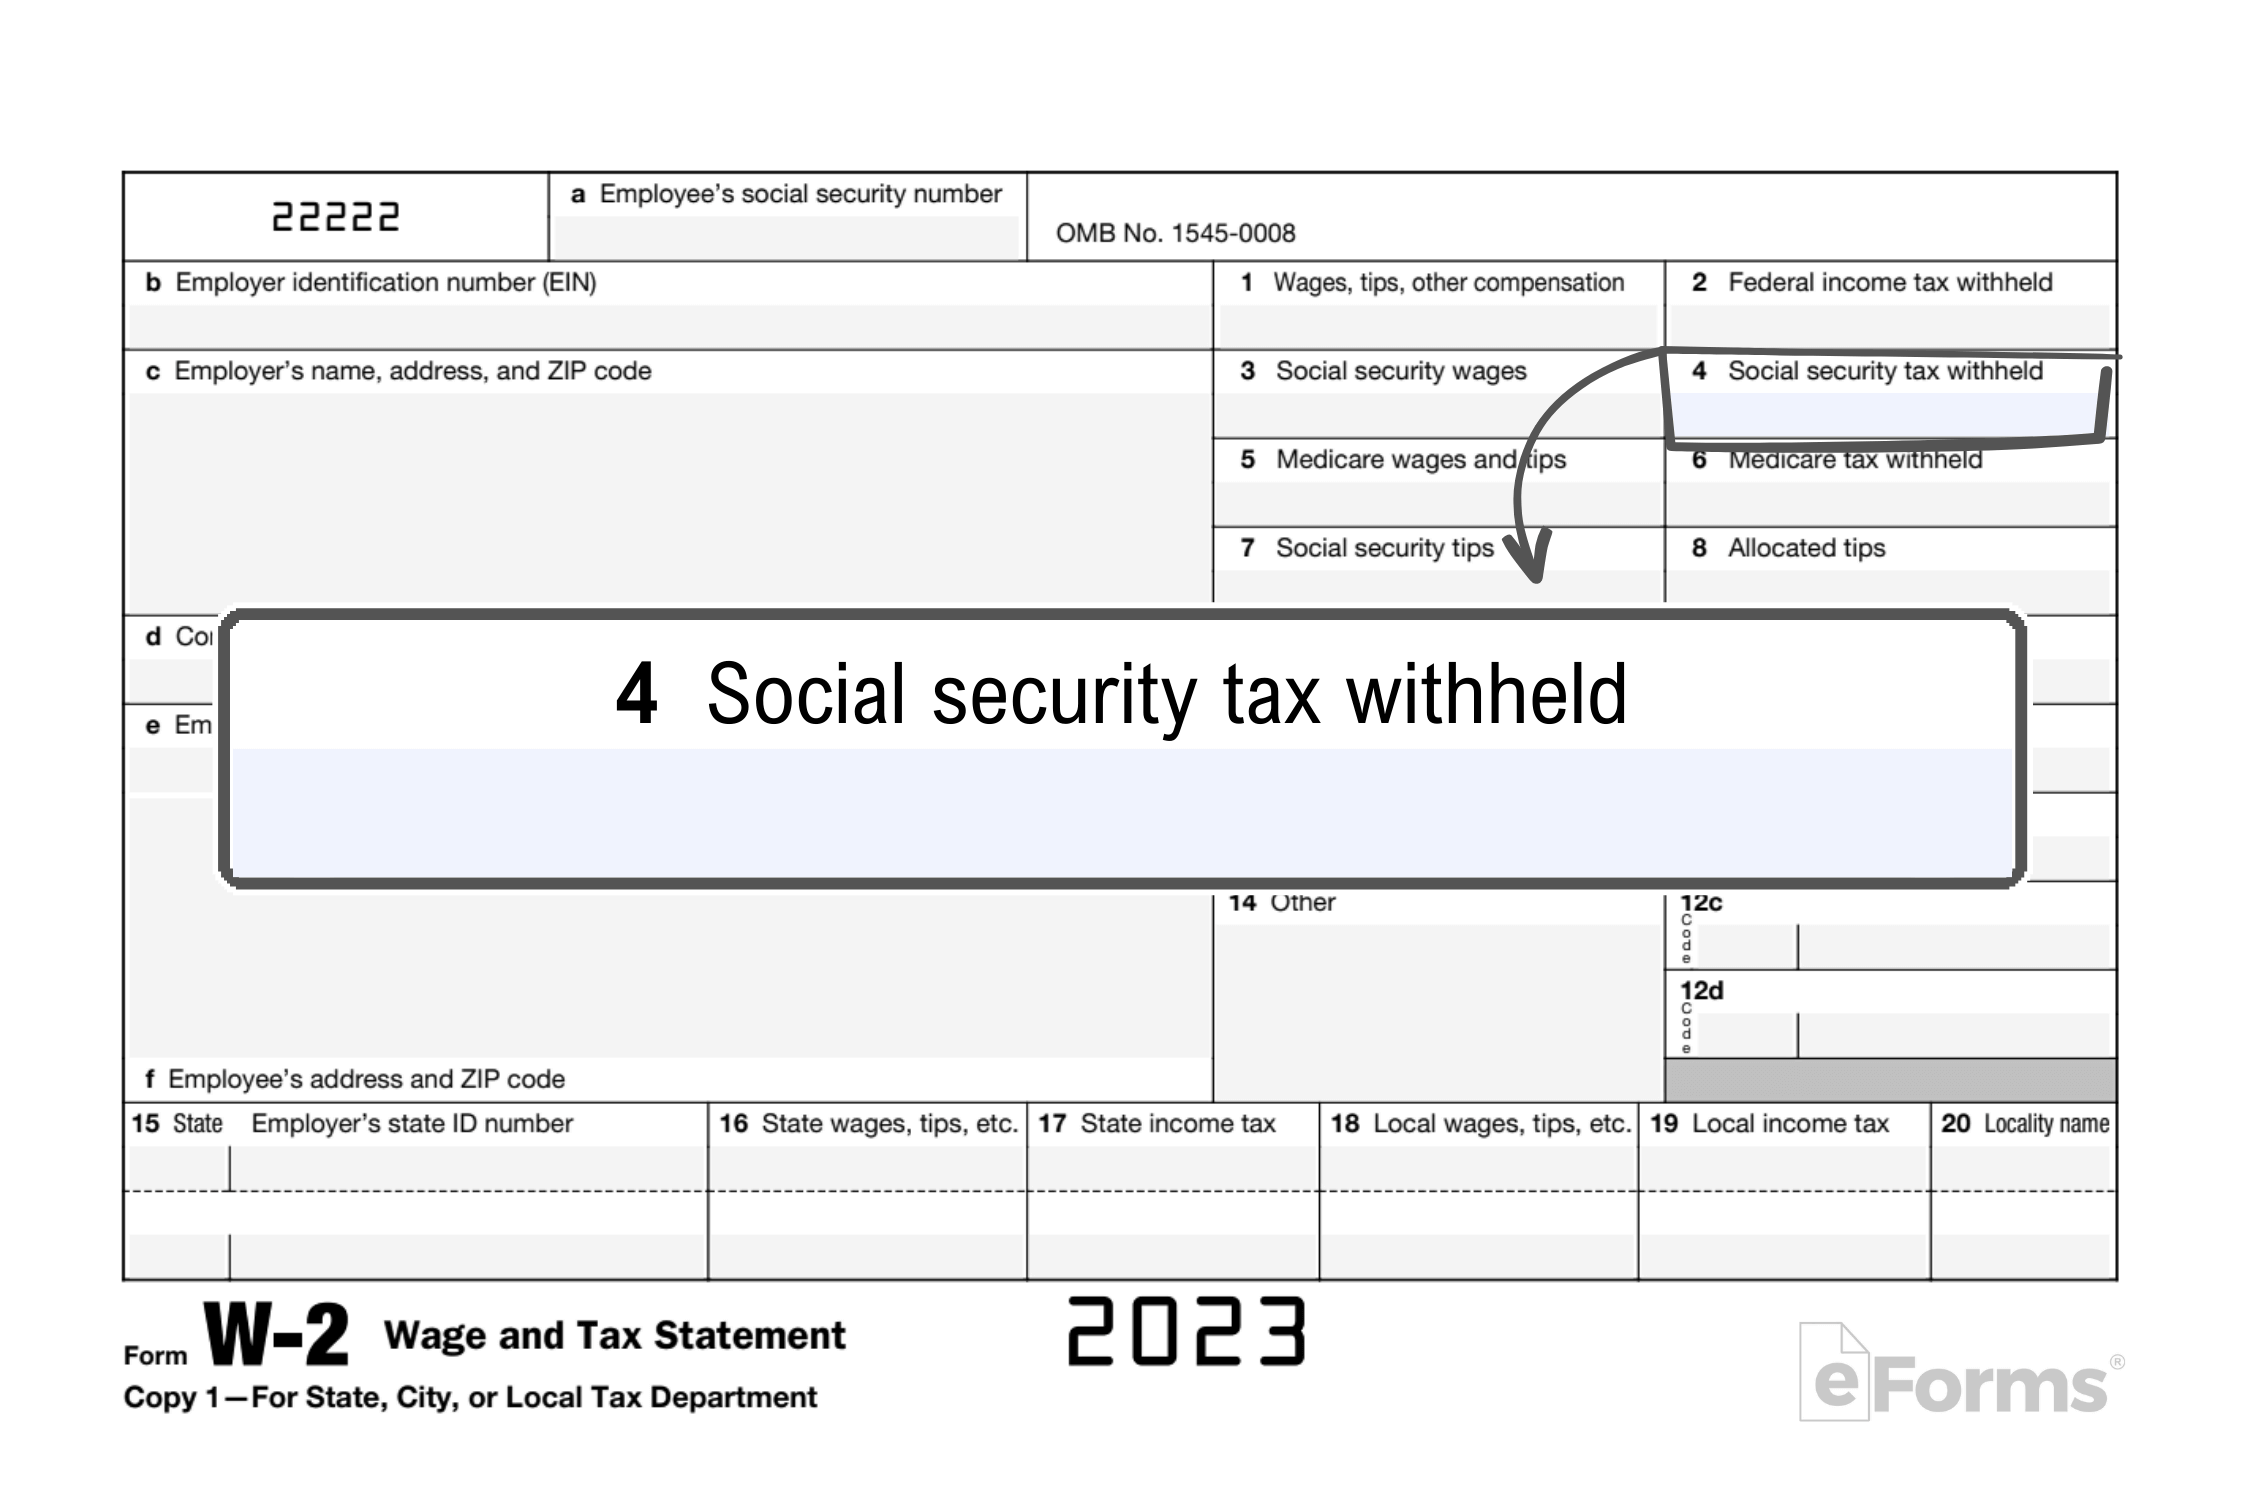 Free Irs Form W-2 | Wage And Tax Statement - Pdf – Eforms regarding How Do I Get My W2 Form From Social Security